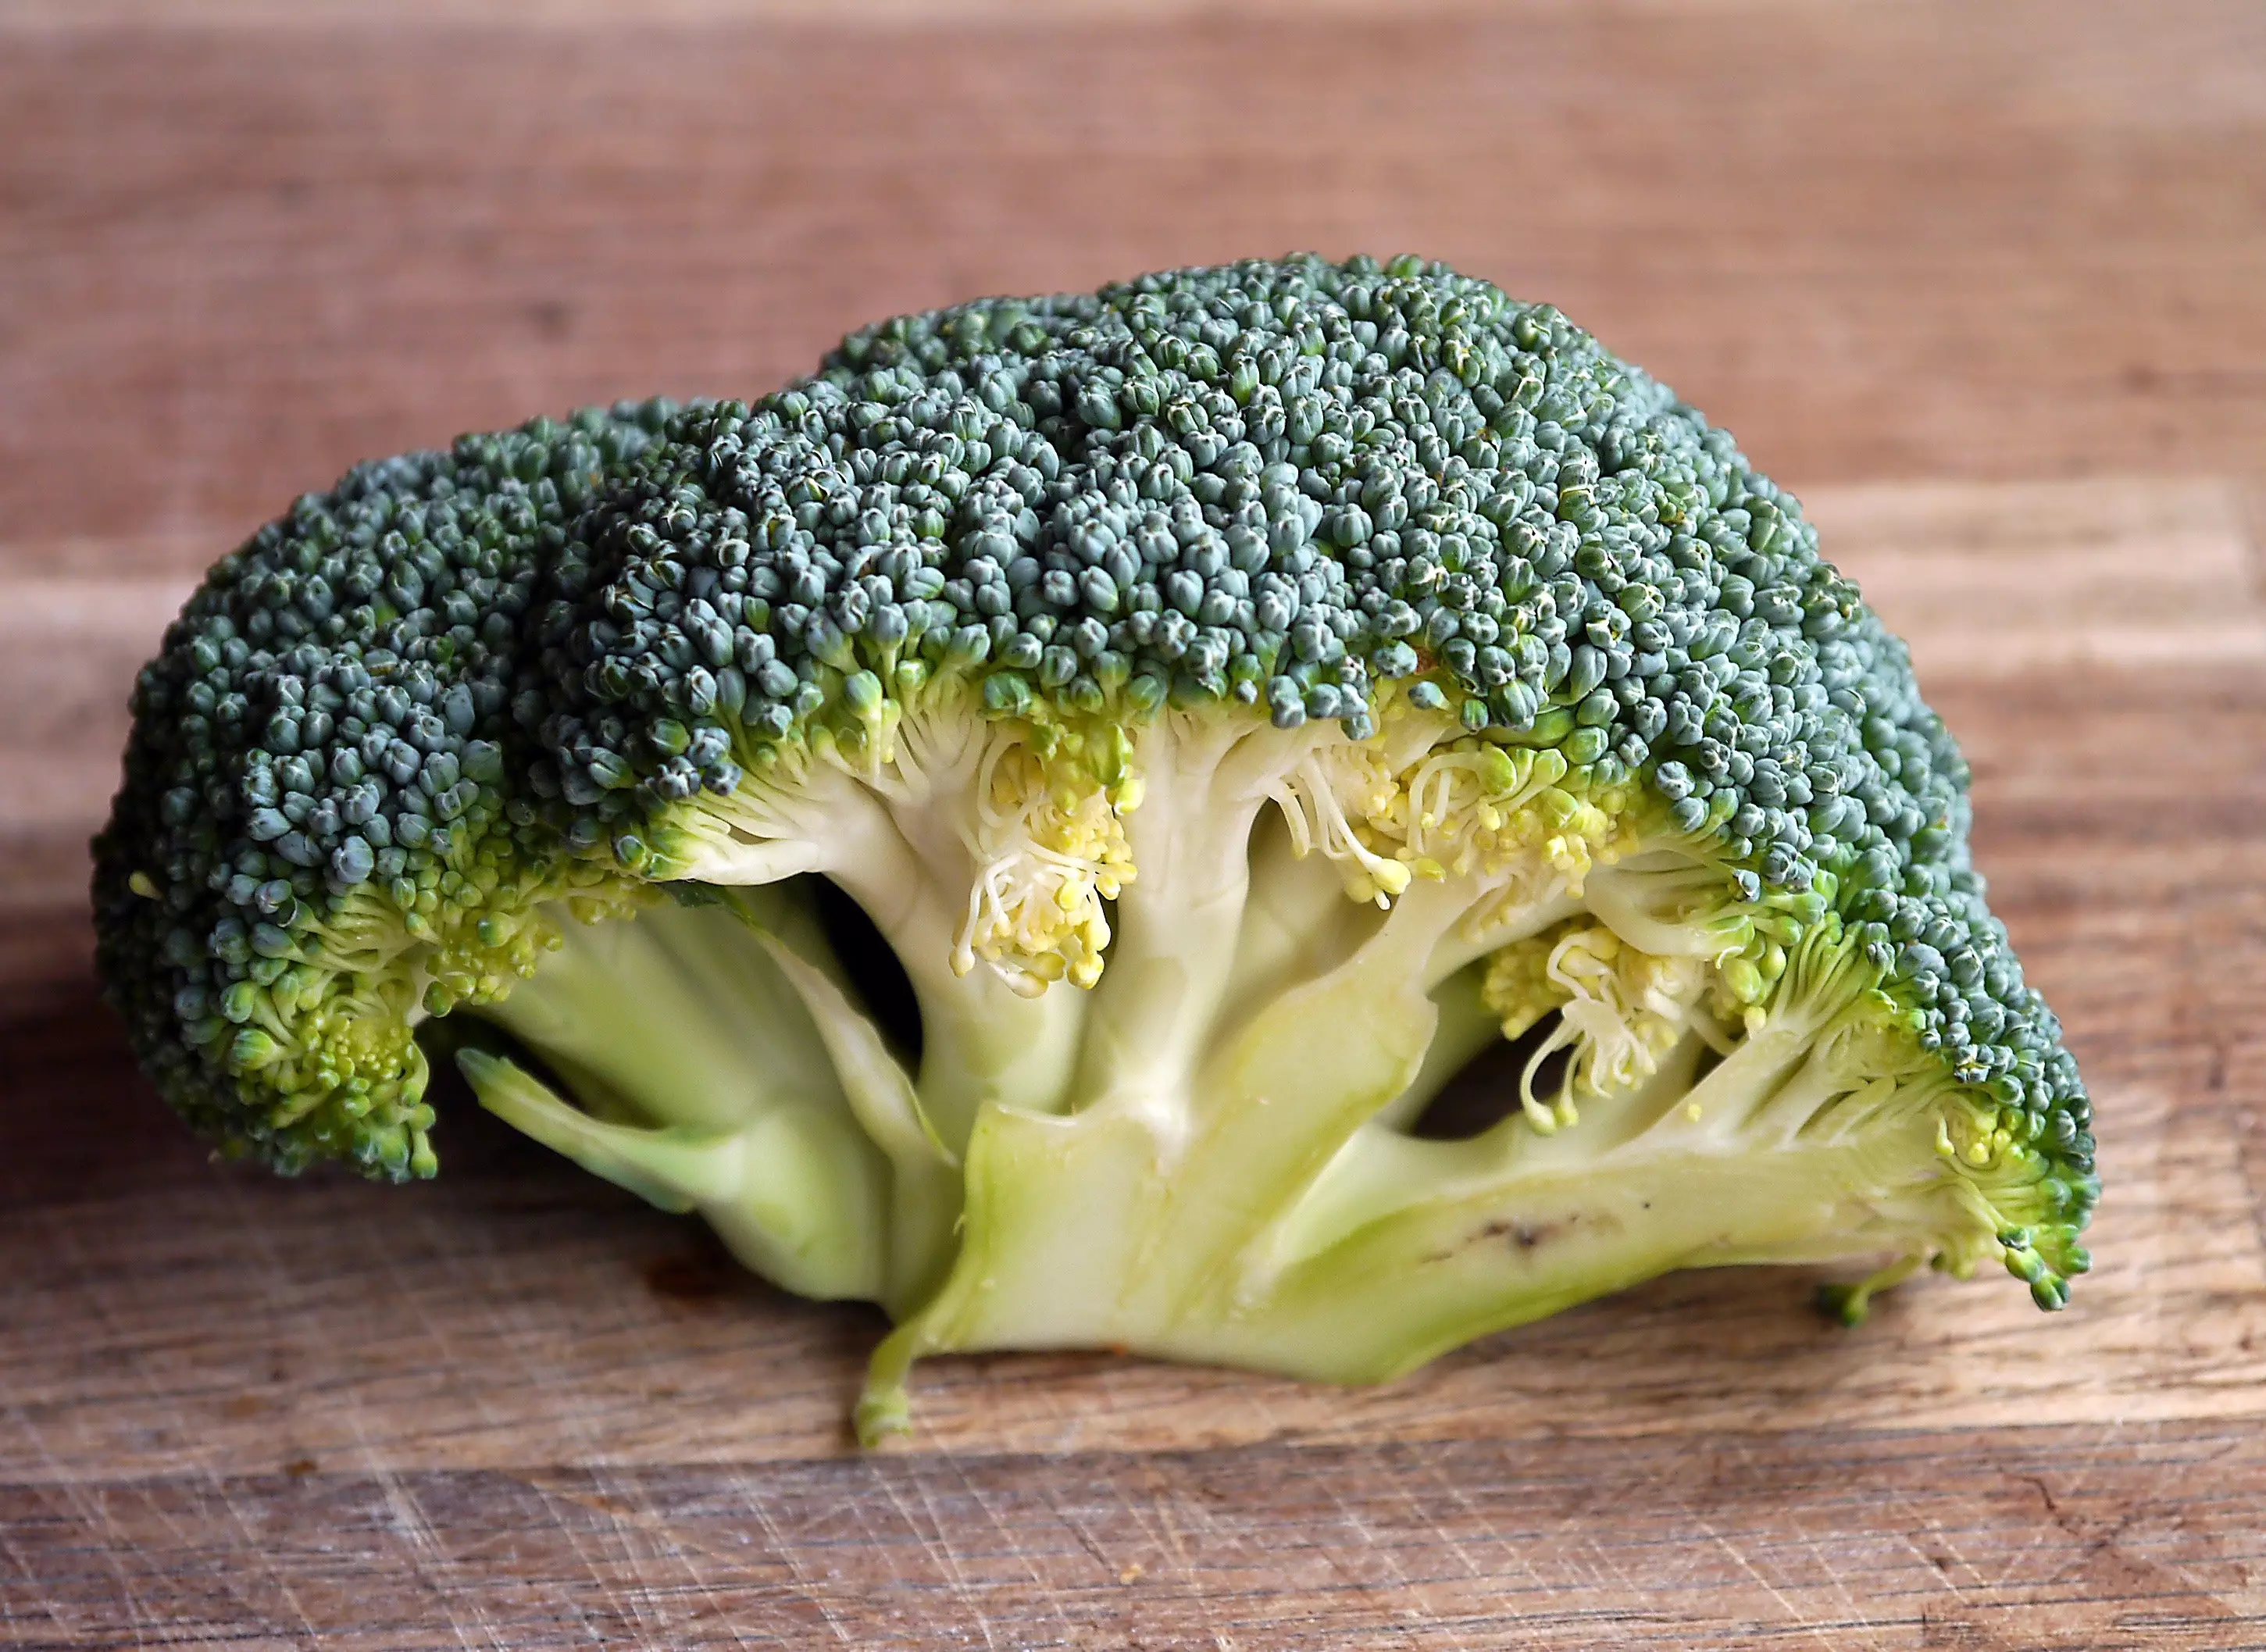 People with the gene are likely to find broccoli, brussels sprouts and cabbage unpleasantly bitter. (